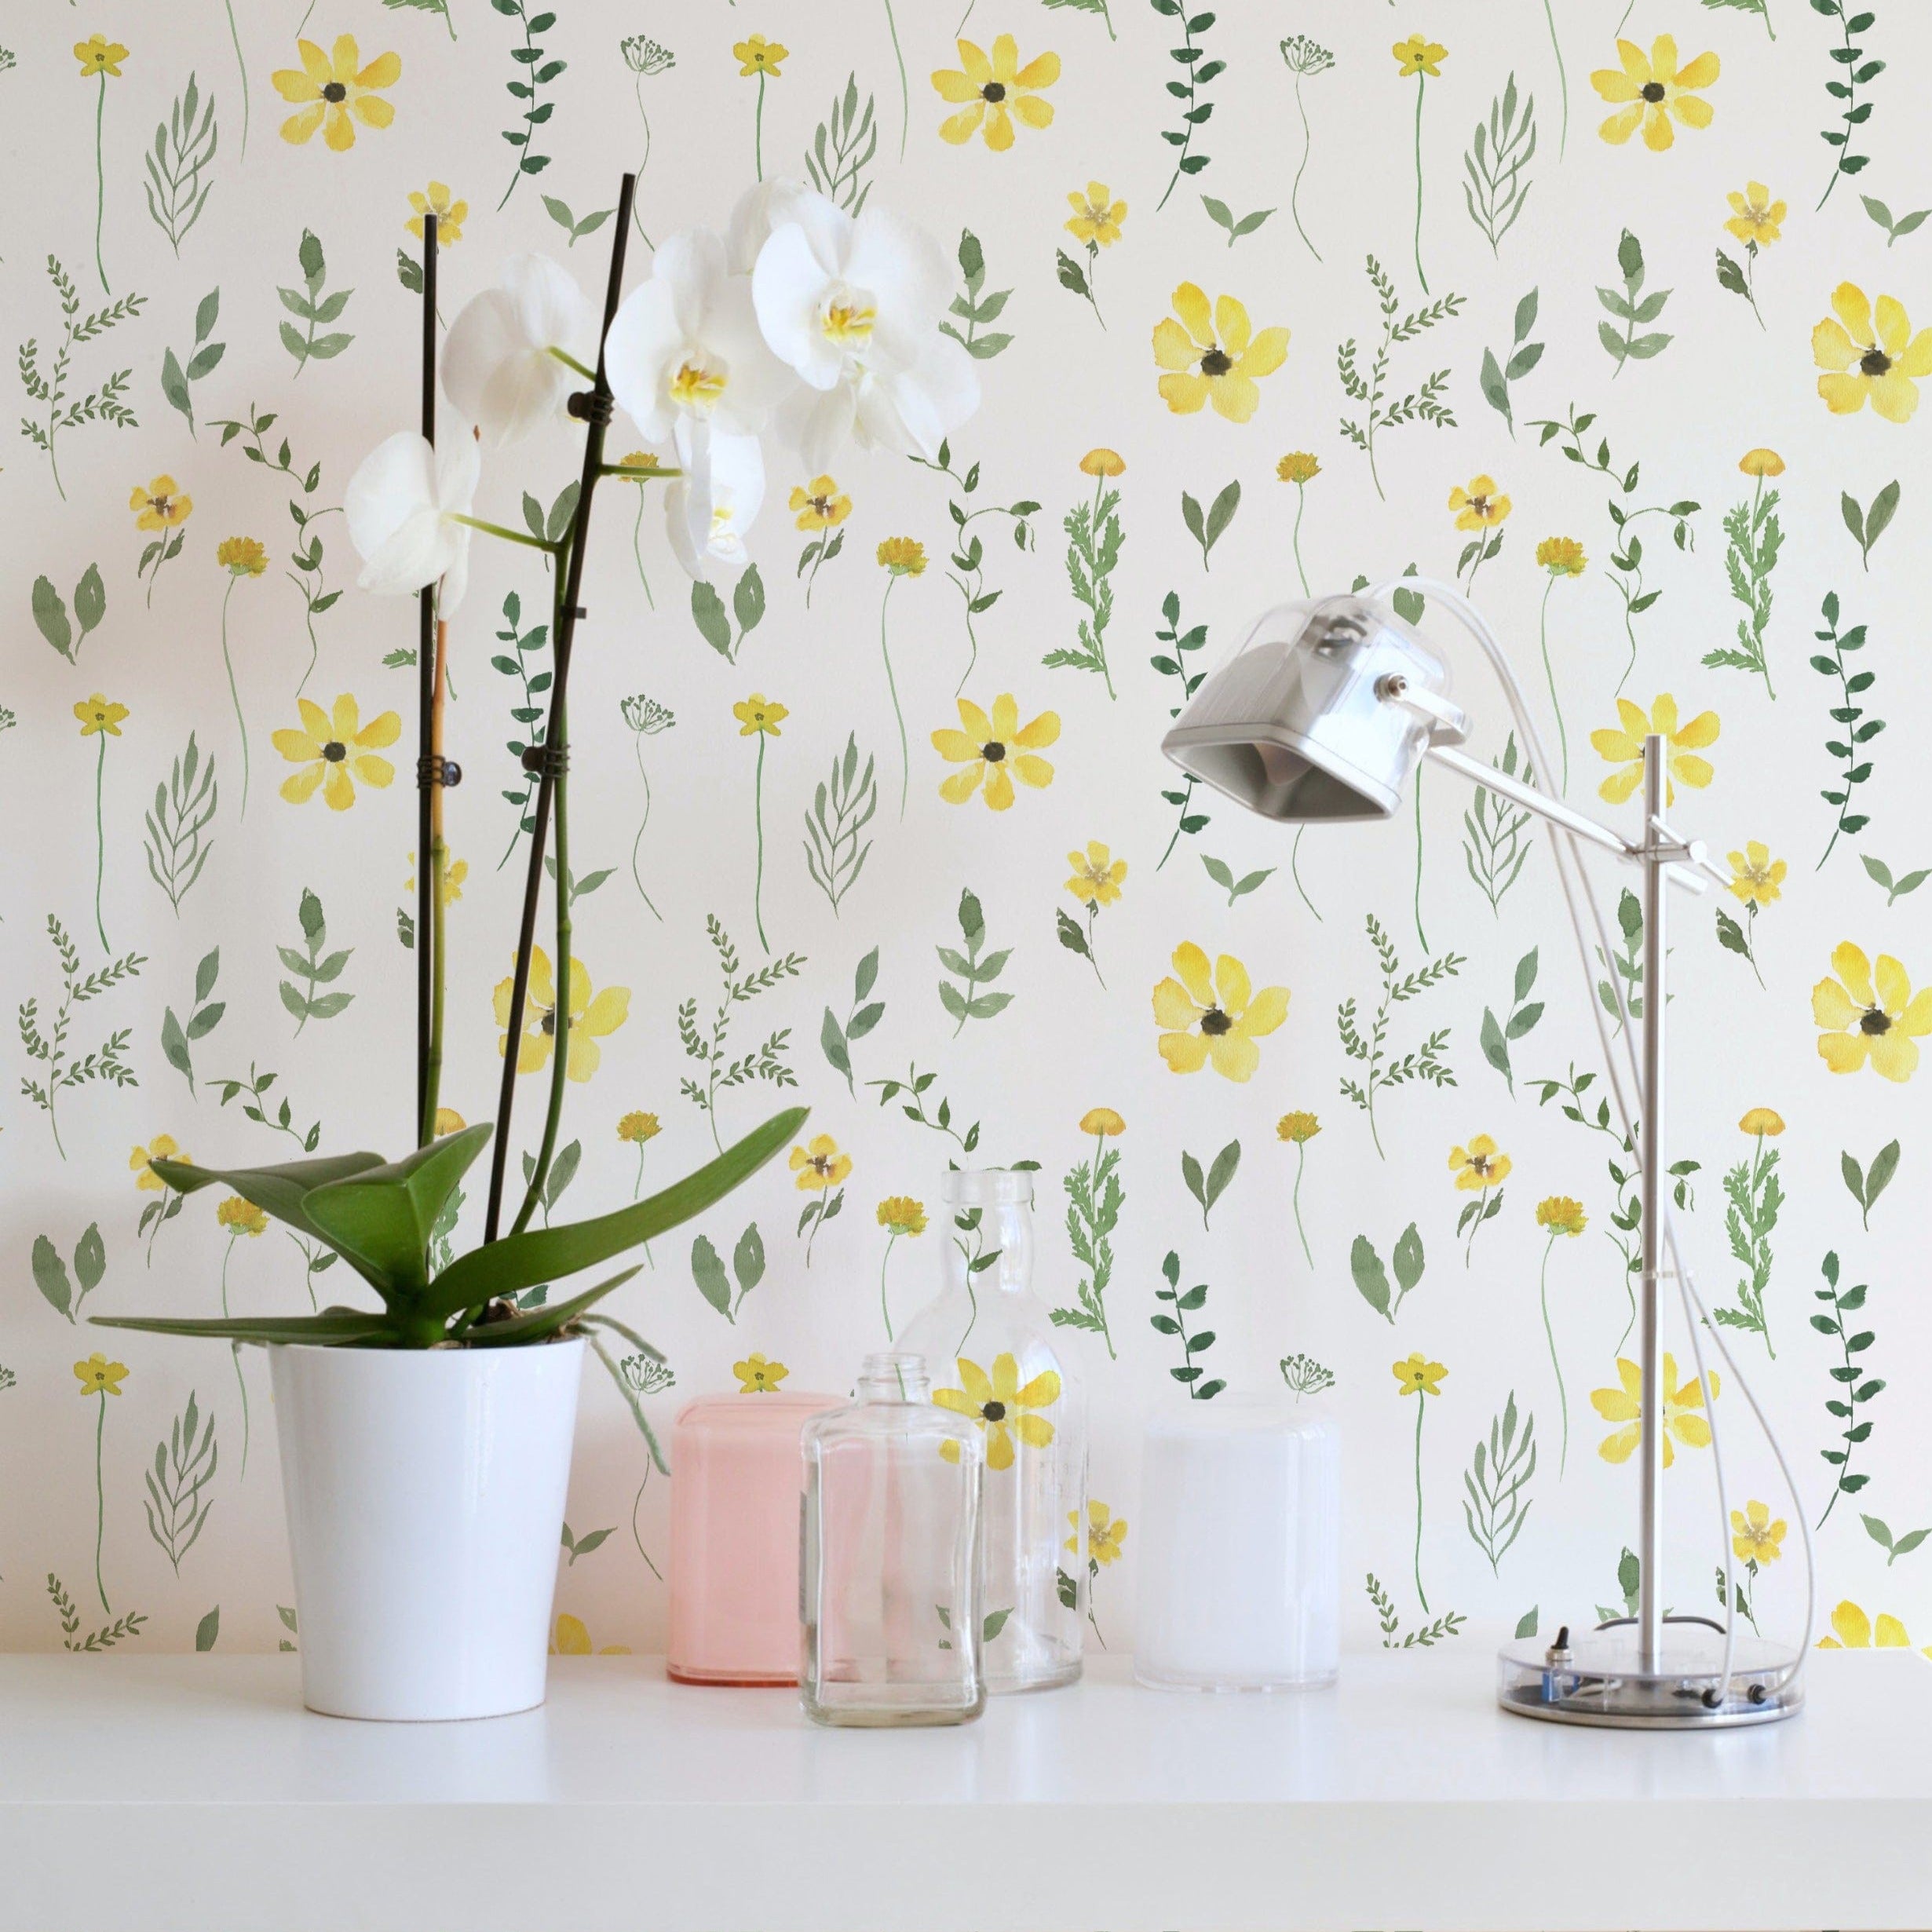 A stylish room corner with the Spring Field Wallpaper - V, highlighting its cheerful yellow flower pattern. The decor includes a white orchid in a pot and a sleek metallic desk lamp on a white desk